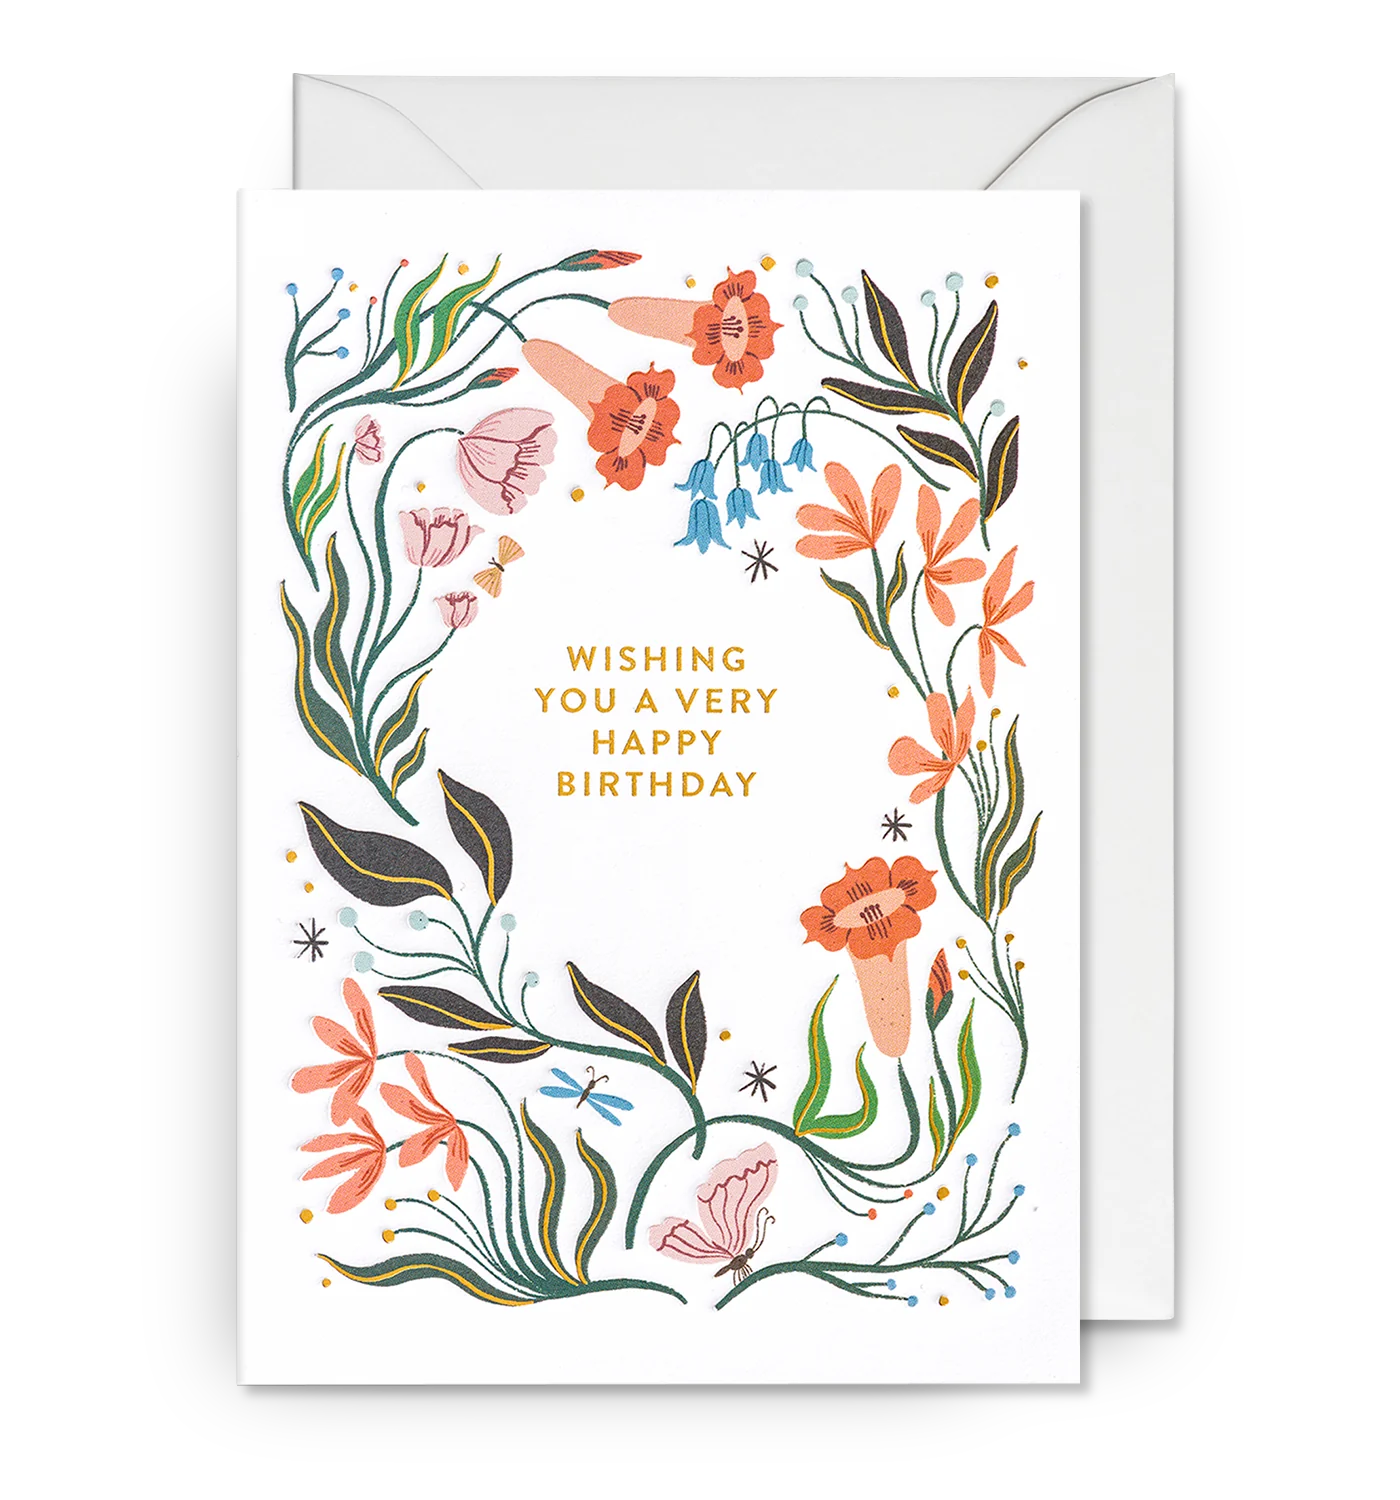 Illustrated Wishing You a Very Happy Birthday Card by Meghann Rader